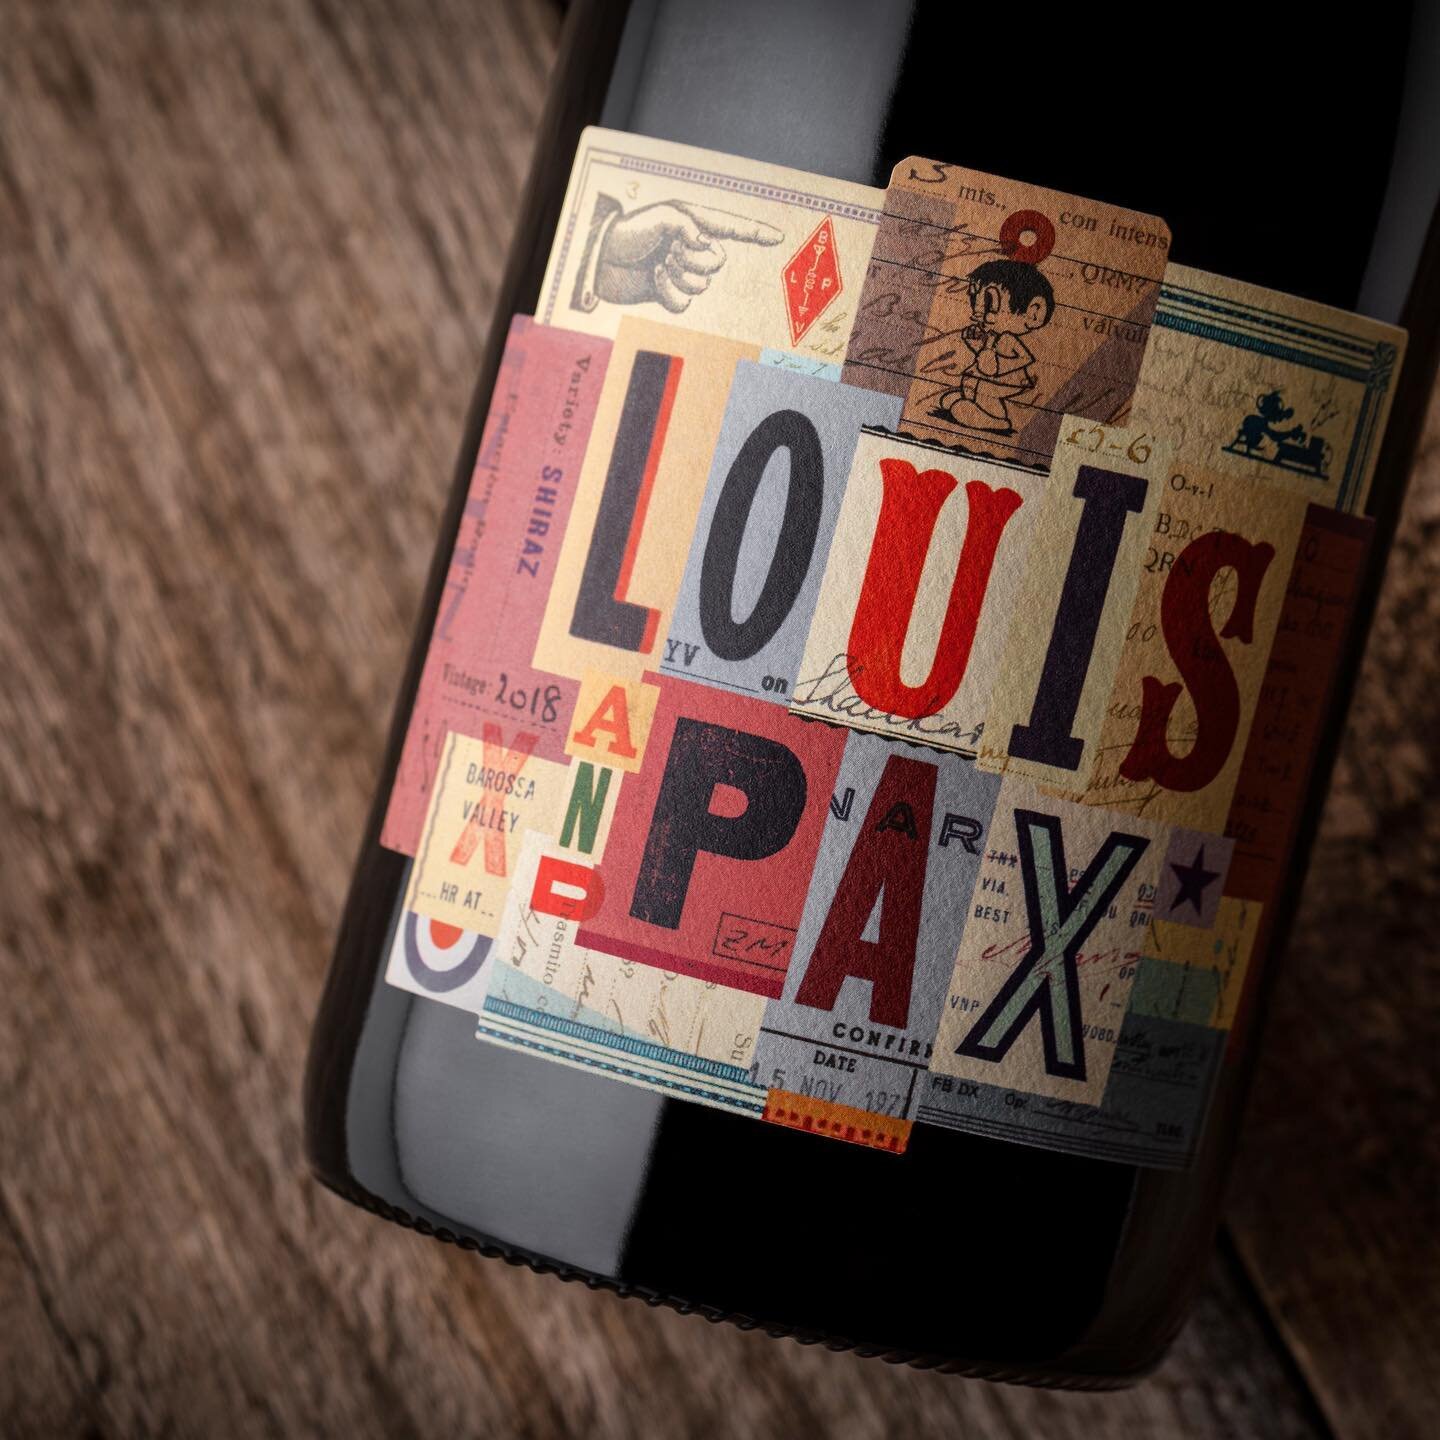 Recent work for @louisandpax #newvintage #newlabel #aussiewines #southaustralia #photography